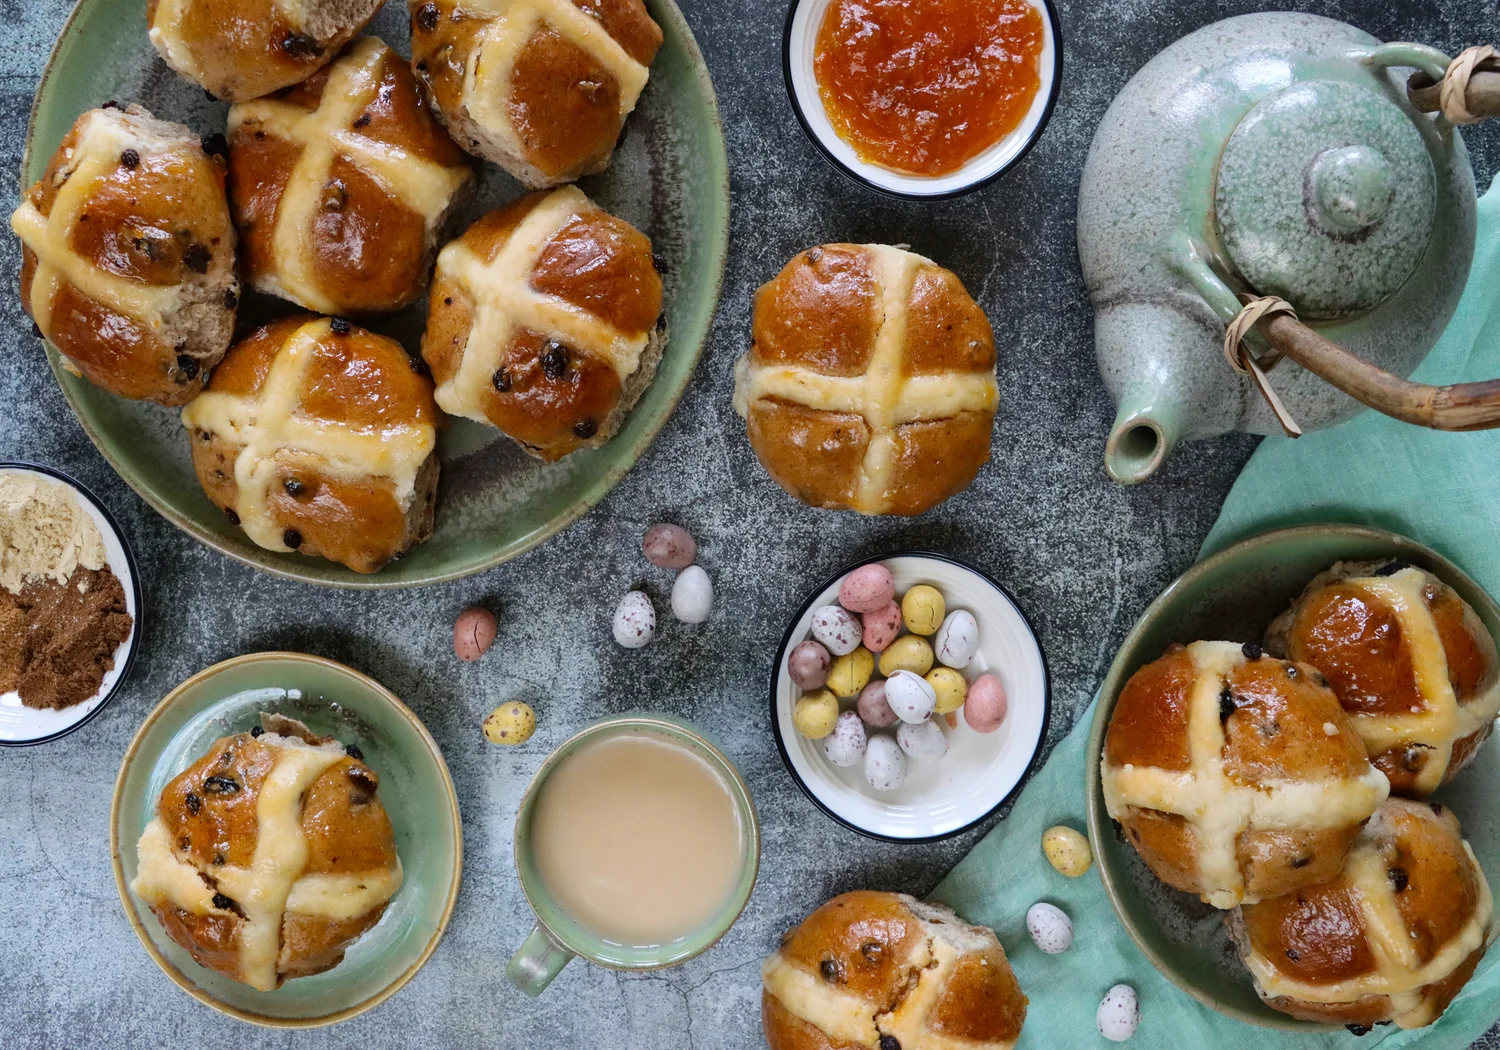 Hop, skip or jump into a British Easter